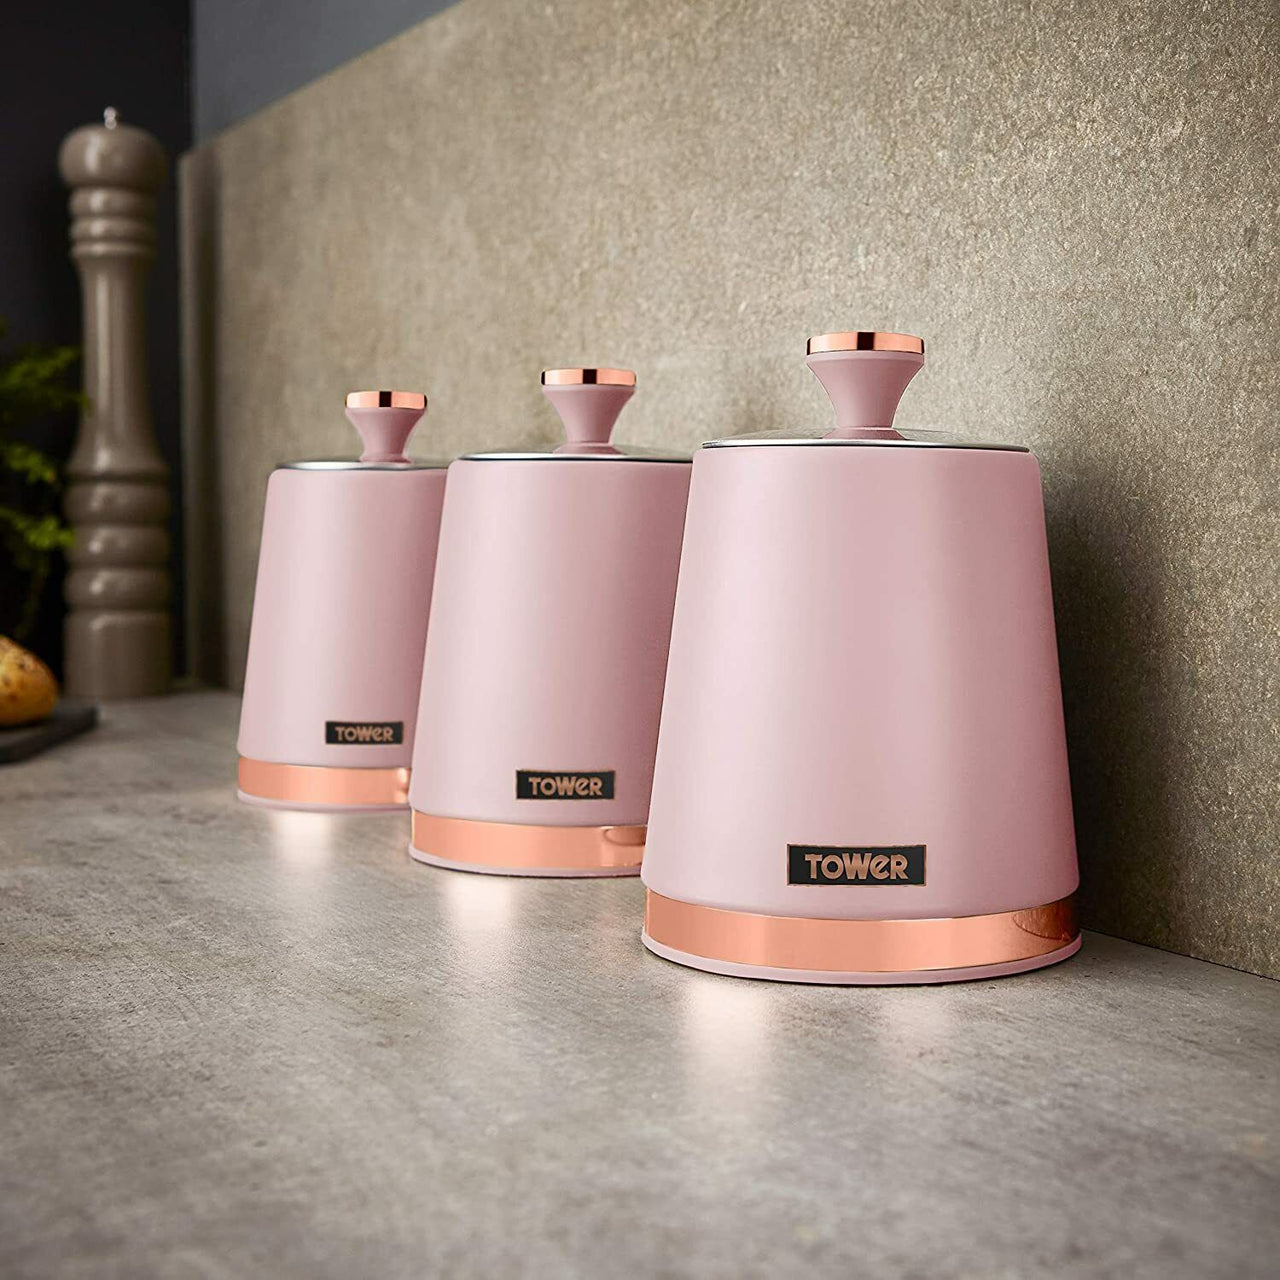 Tower Cavaletto Kitchen Canisters, Mug Tree, Towel Pole Set Pink & Rose Gold